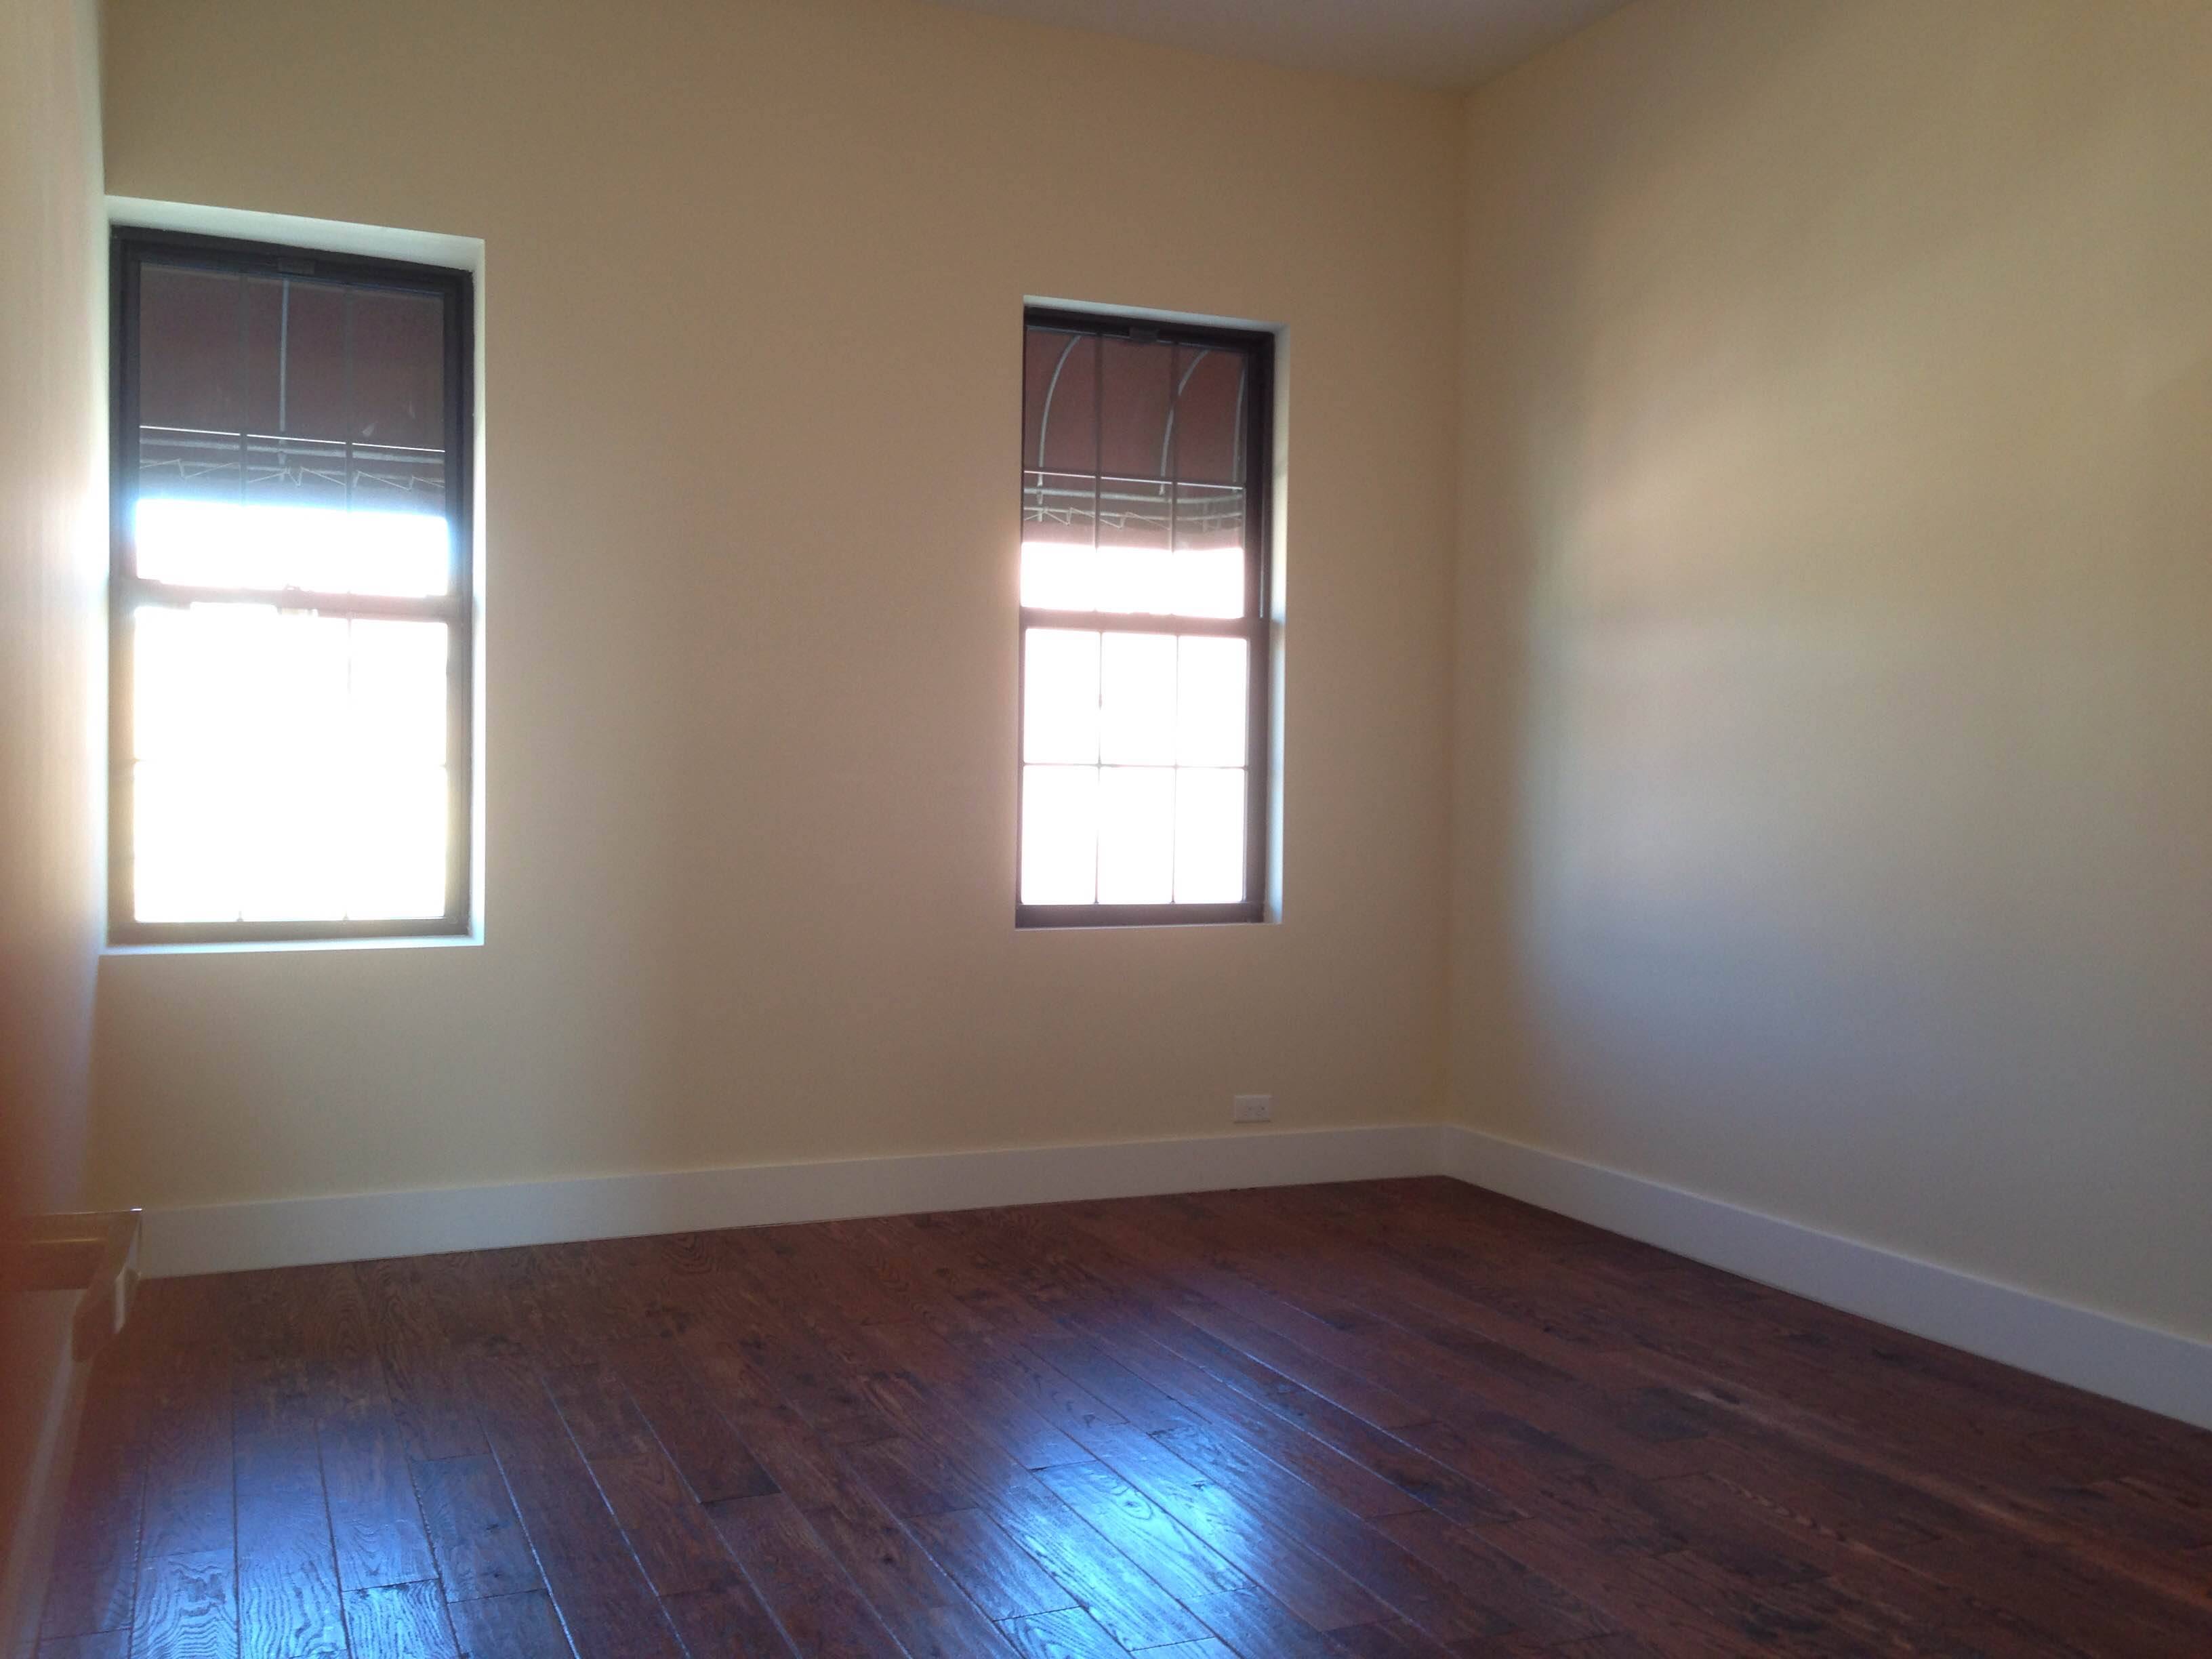 Astoria: Sun Drenched Completely Renovated Full Floor 3 Bed 2 Bath on Broadway & 36th Street